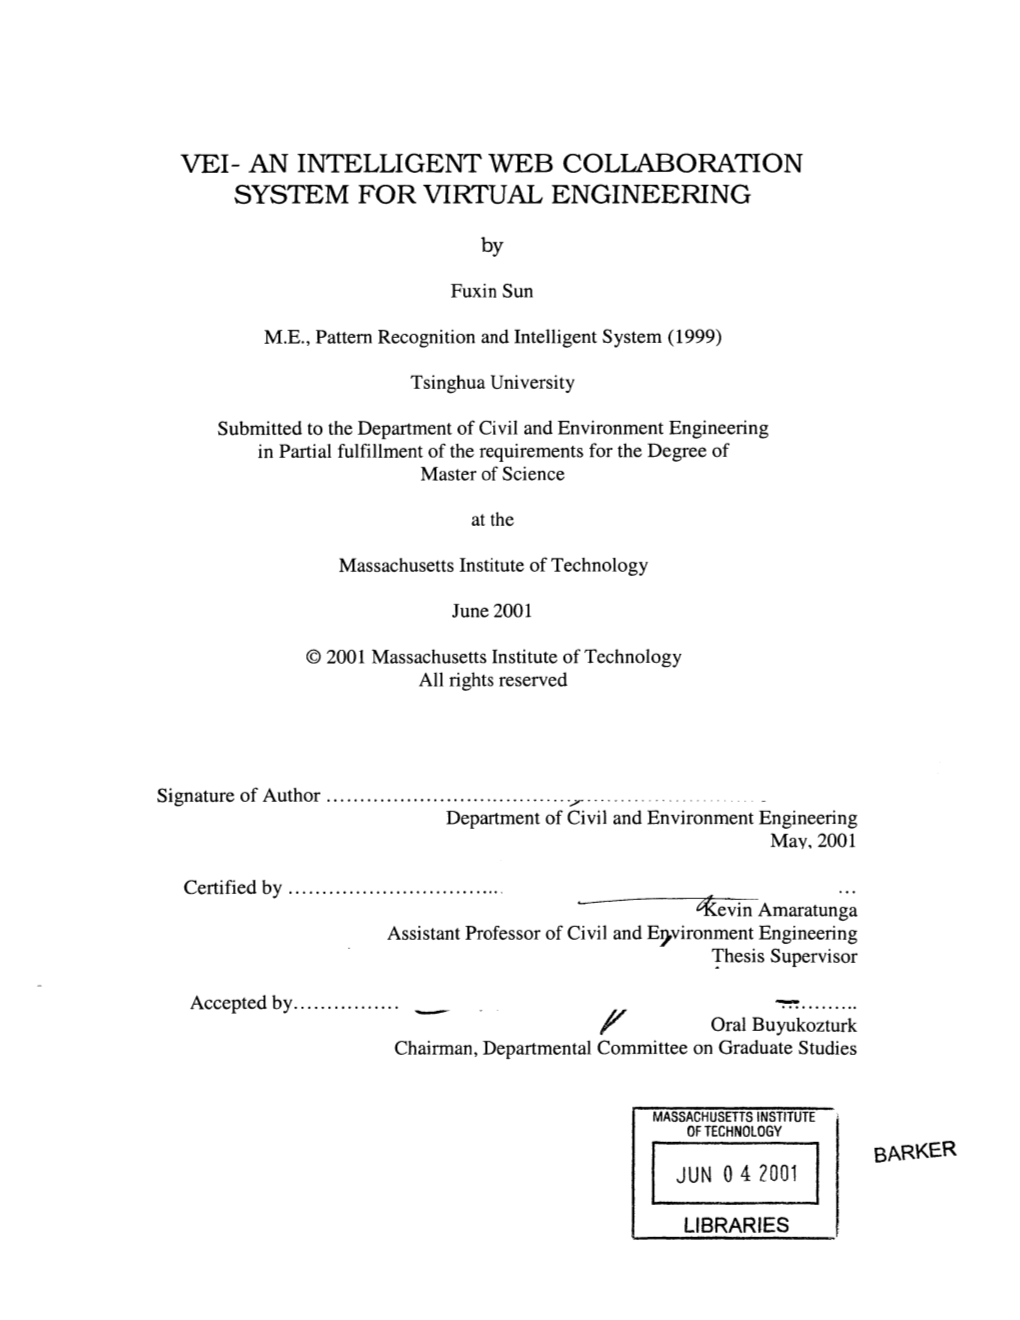 An Intelligent Web Collaboration System for Virtual Engineering